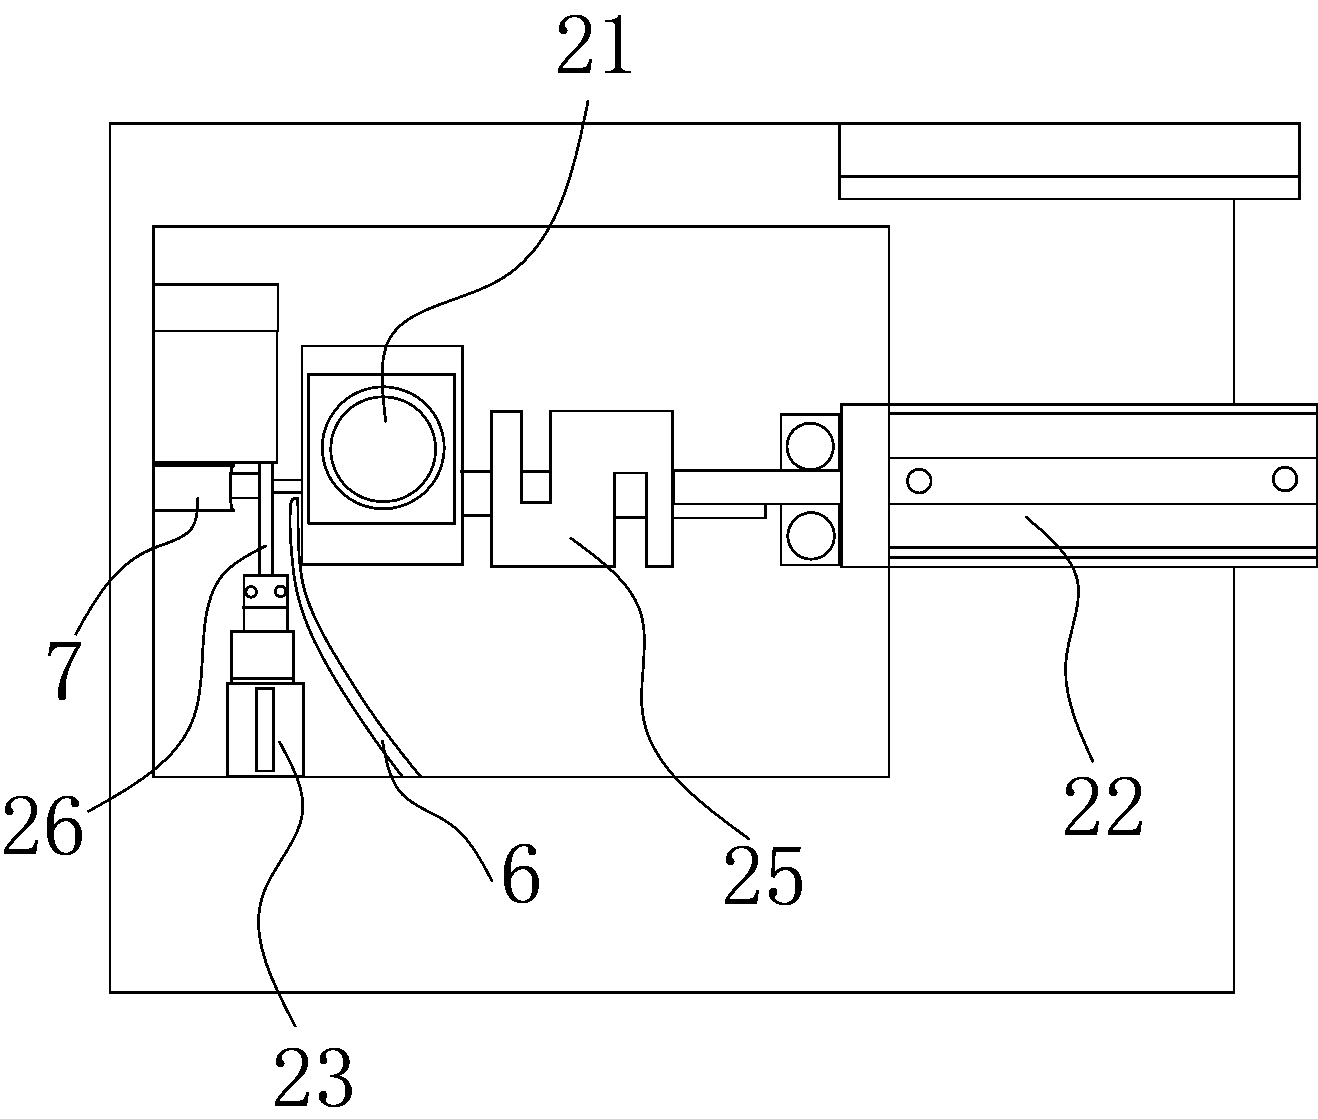 Device with tightening and tailing cutting functions